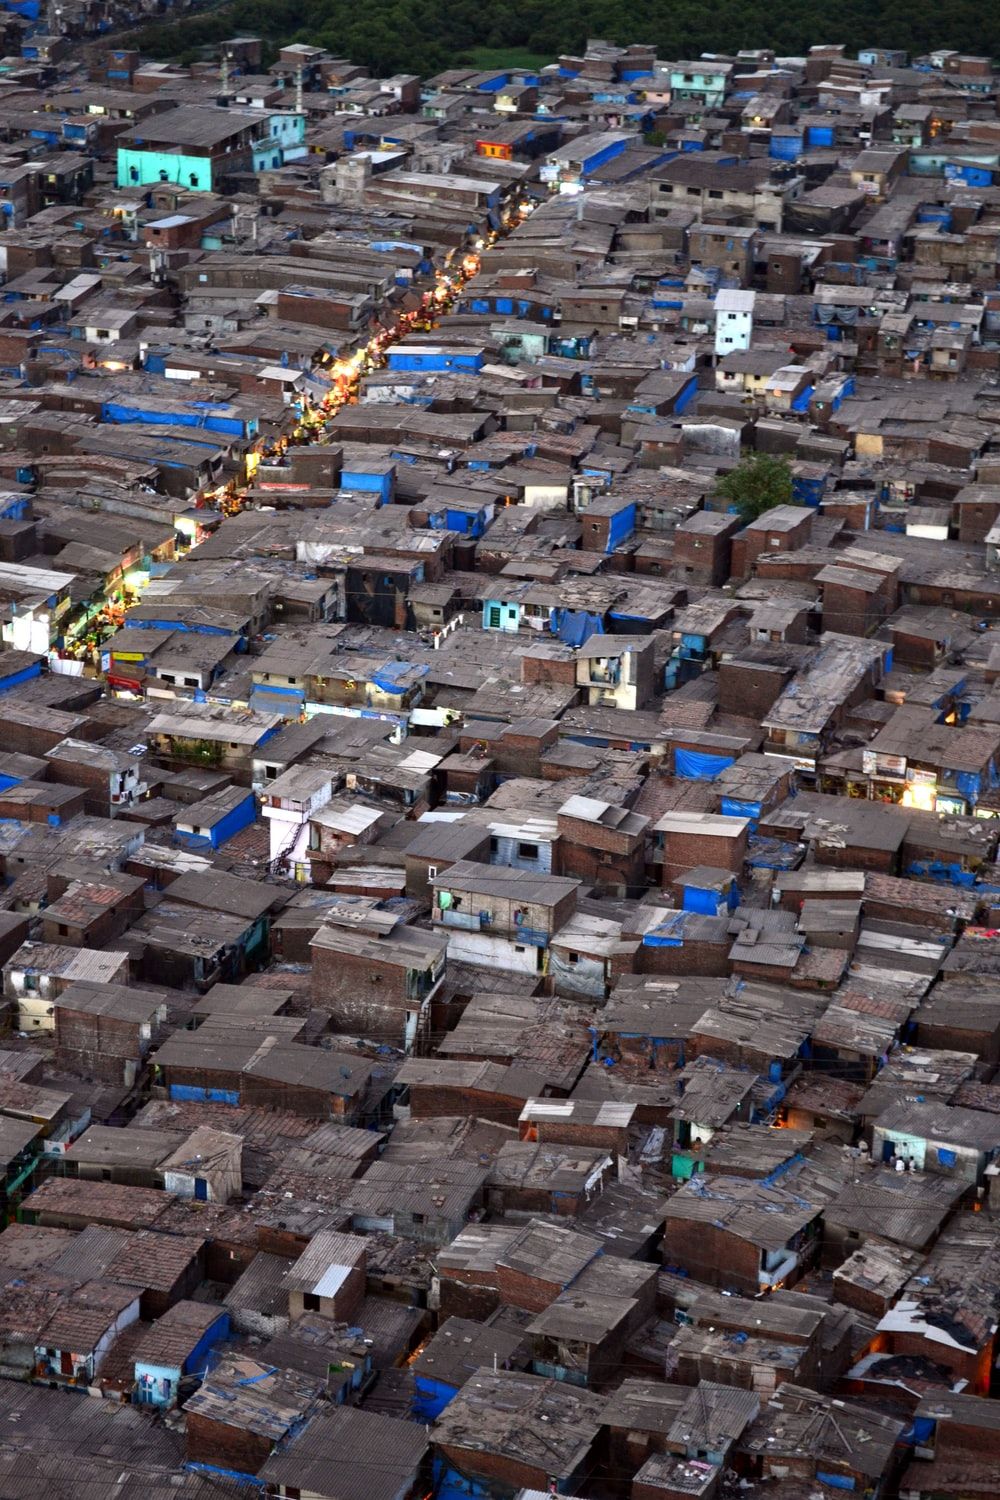 Slums Picture. Download Free Image